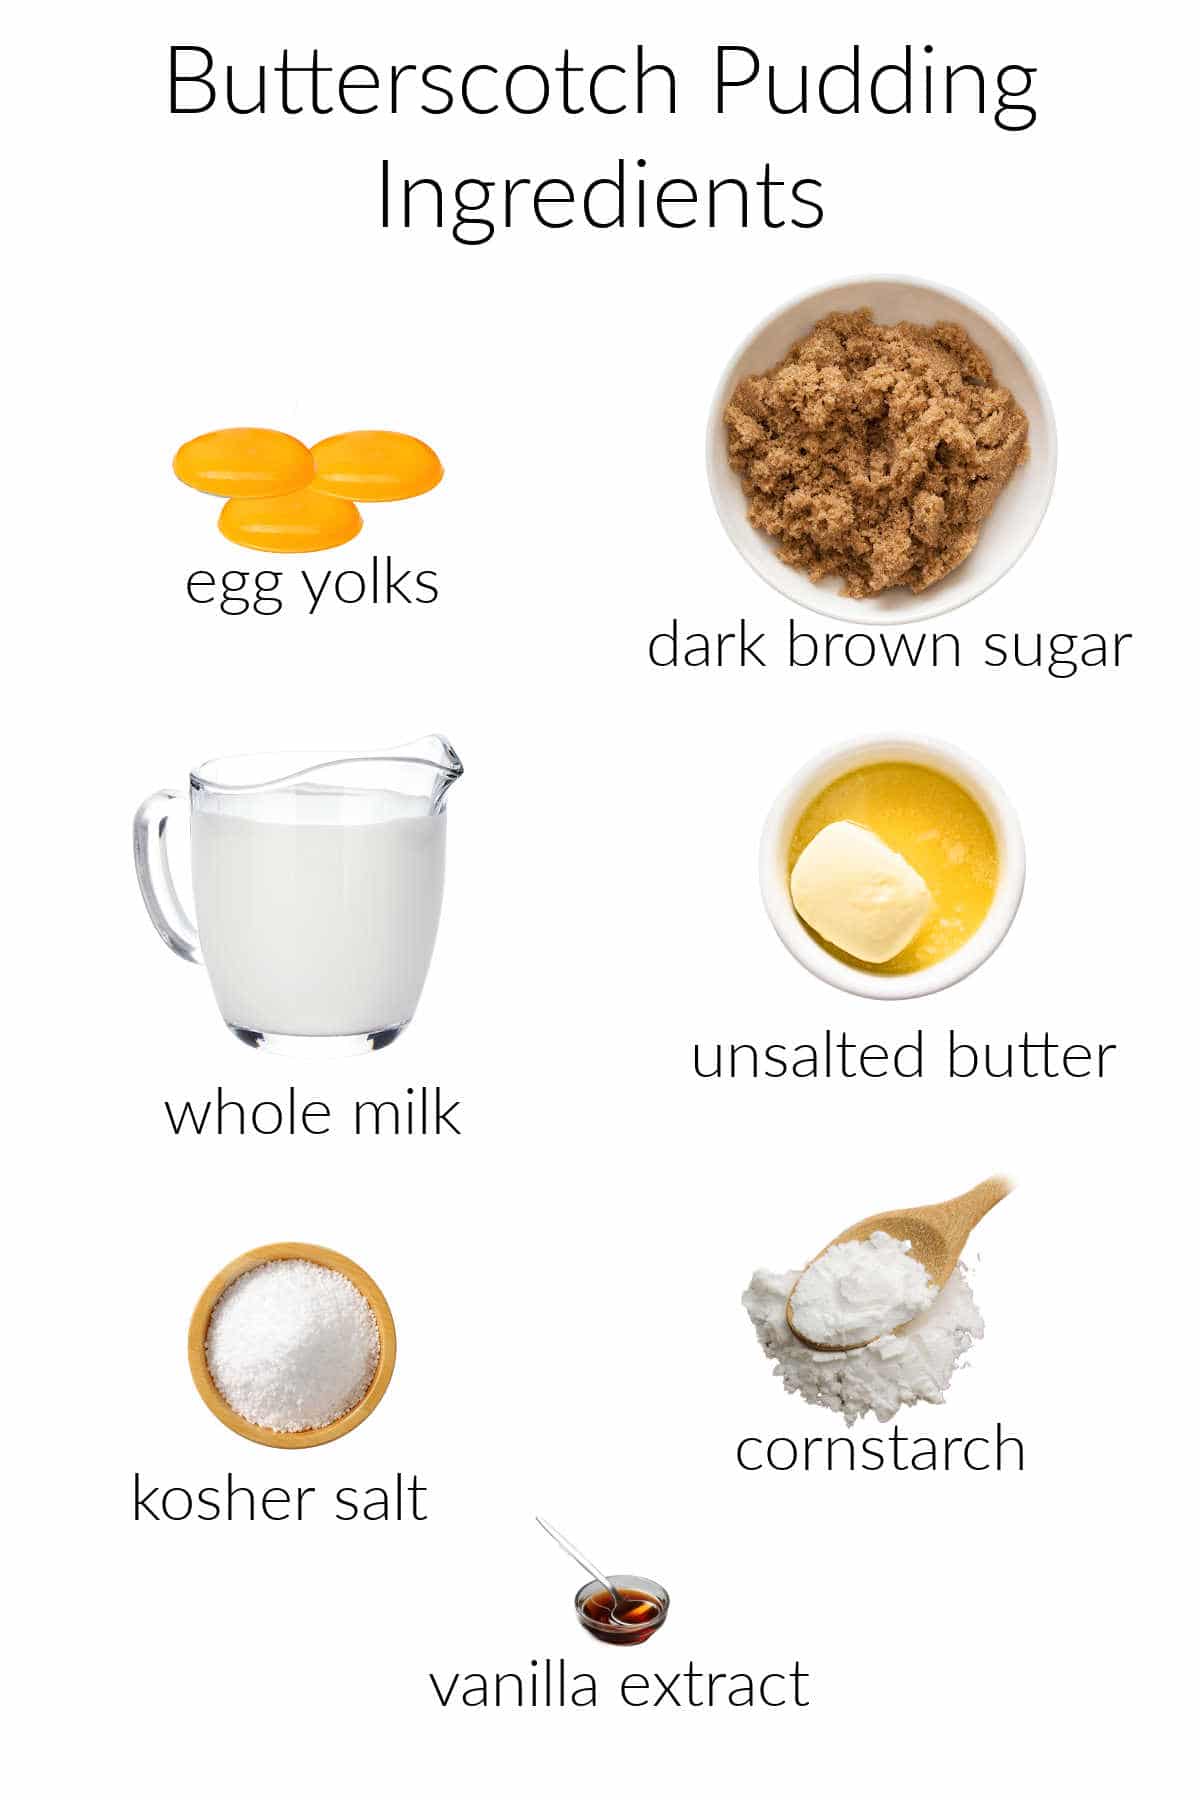 Collage of ingredients for making butterscotch pudding.